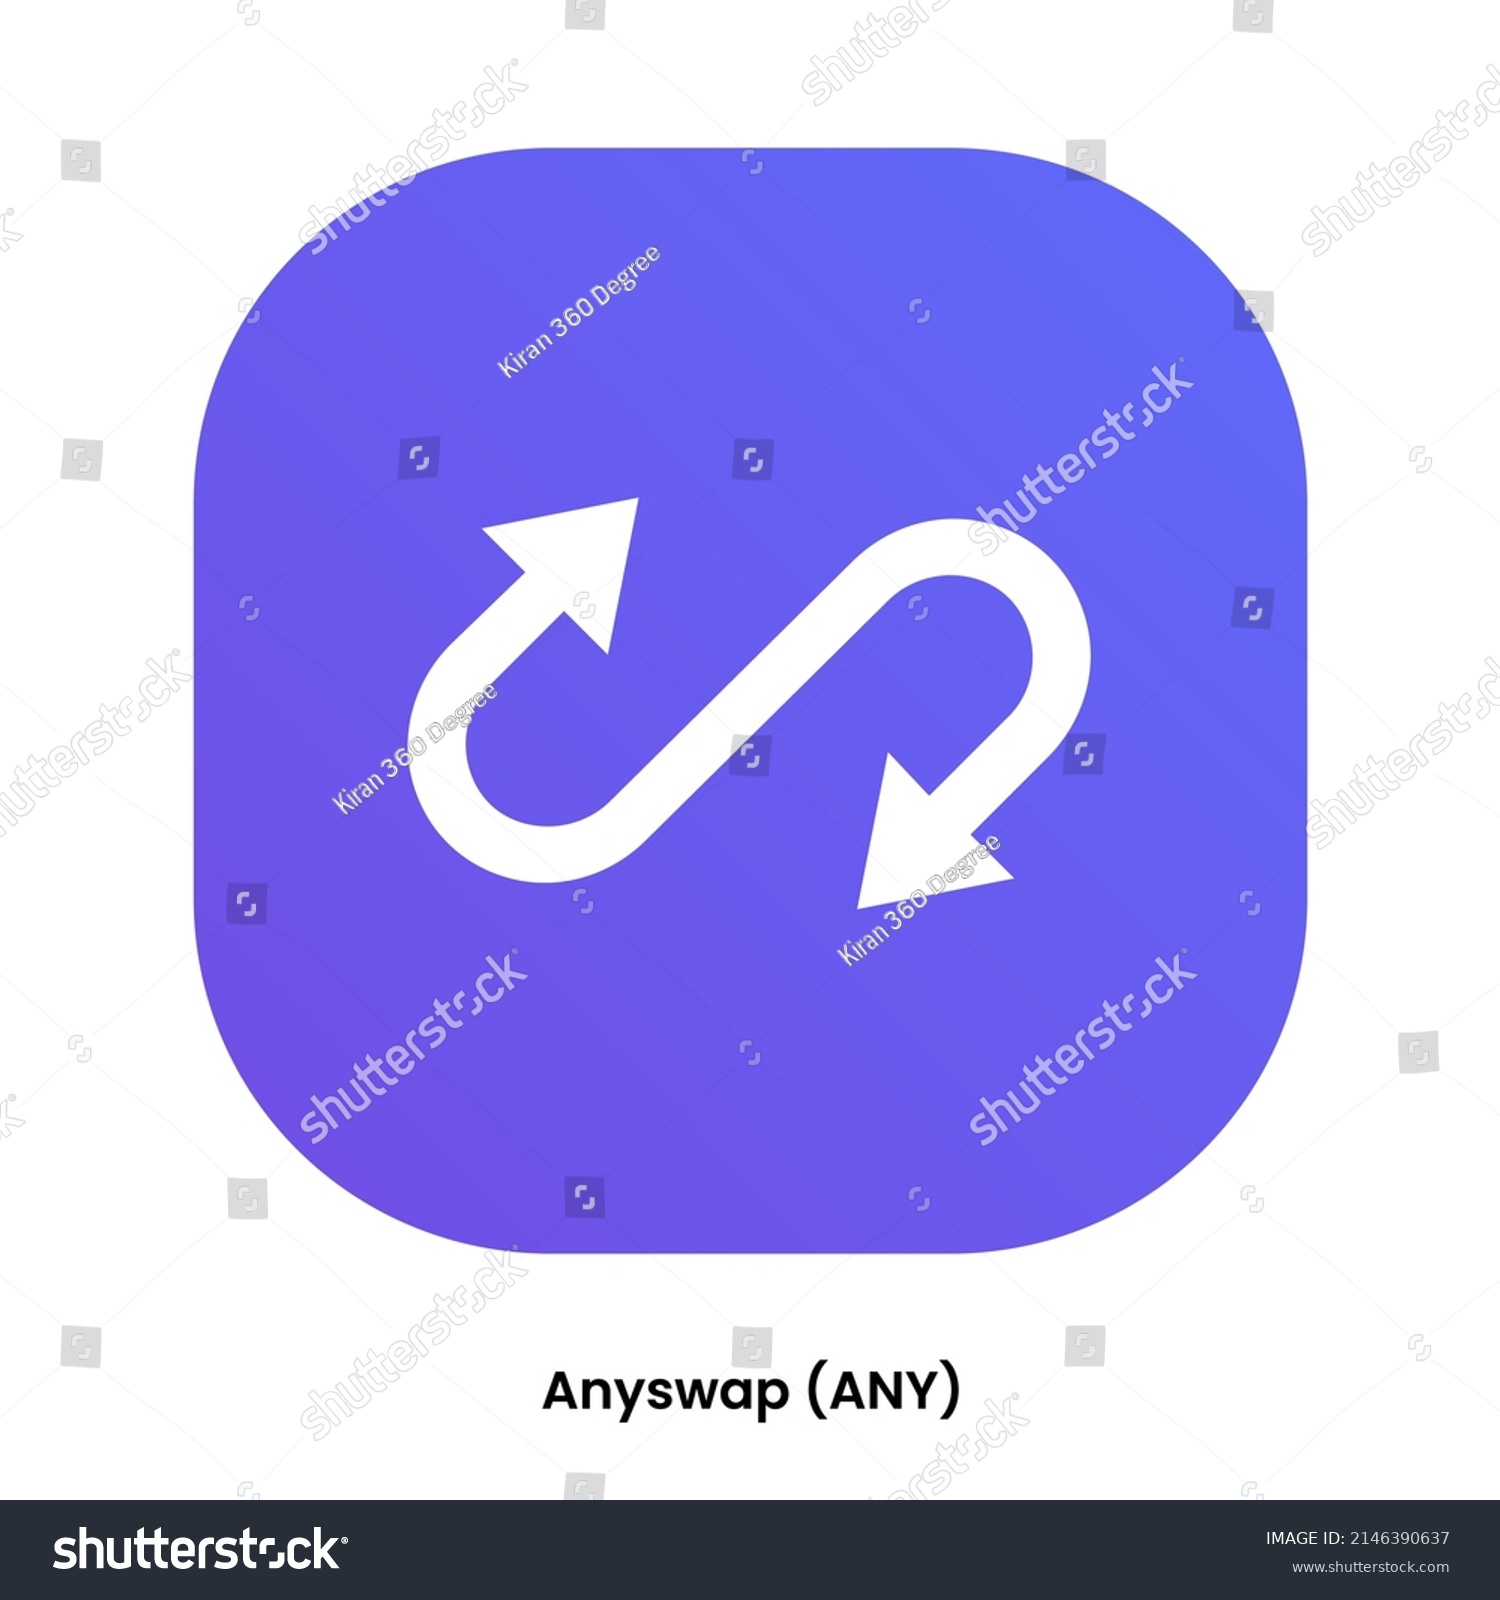 SVG of Anyswap crypto currency with symbol ANY. Crypto logo vector illustration for stickers, icon, badges, labels and emblem designs. svg